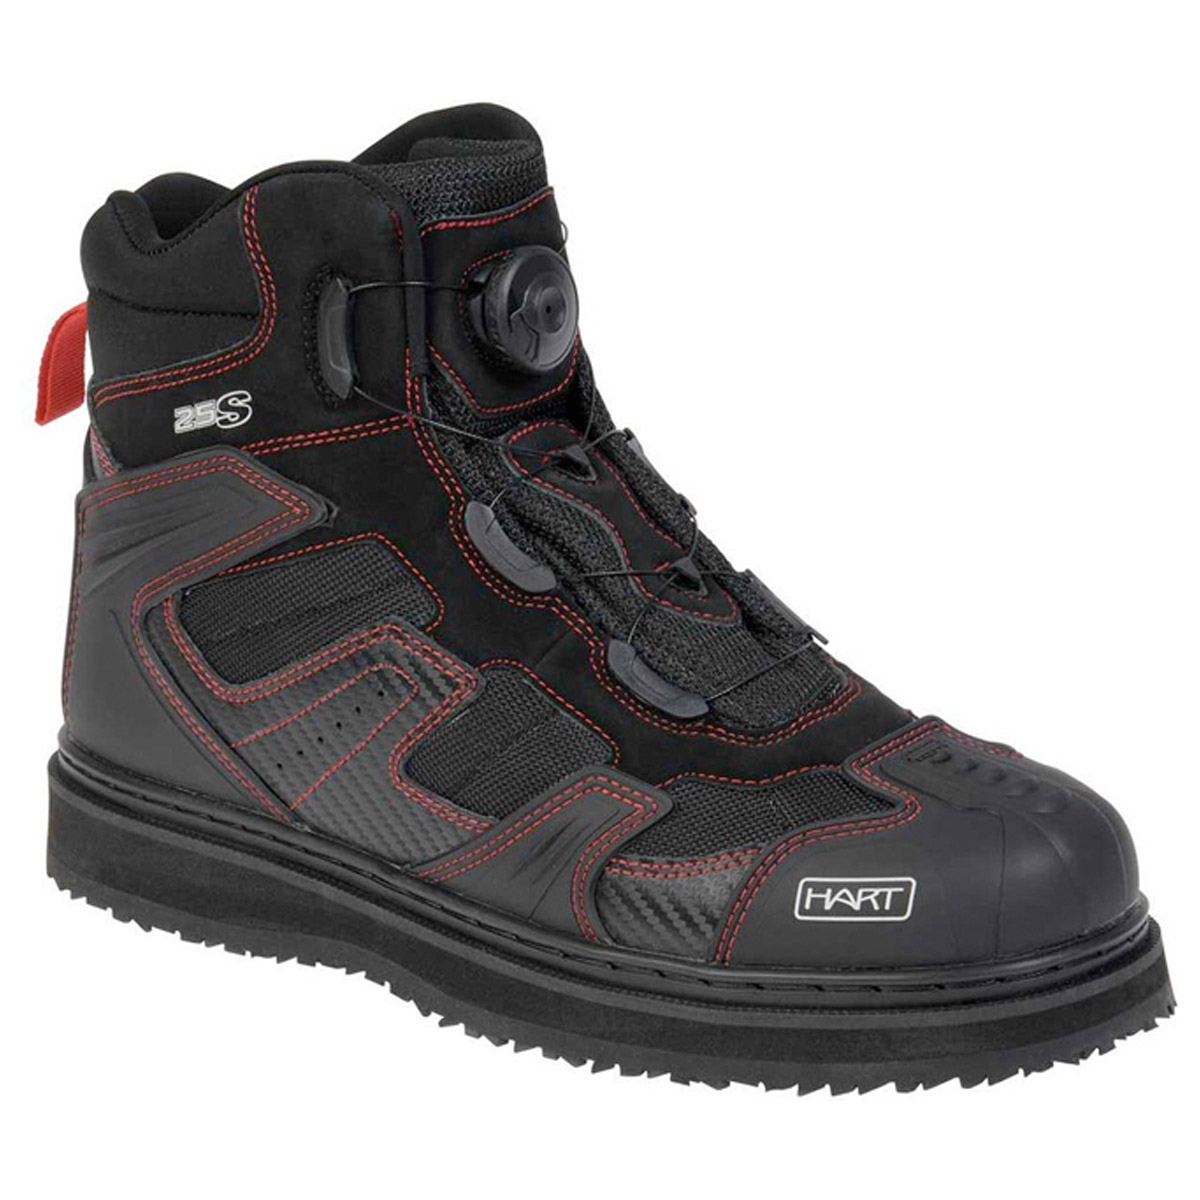 Hart Wading Boots 25S Pro